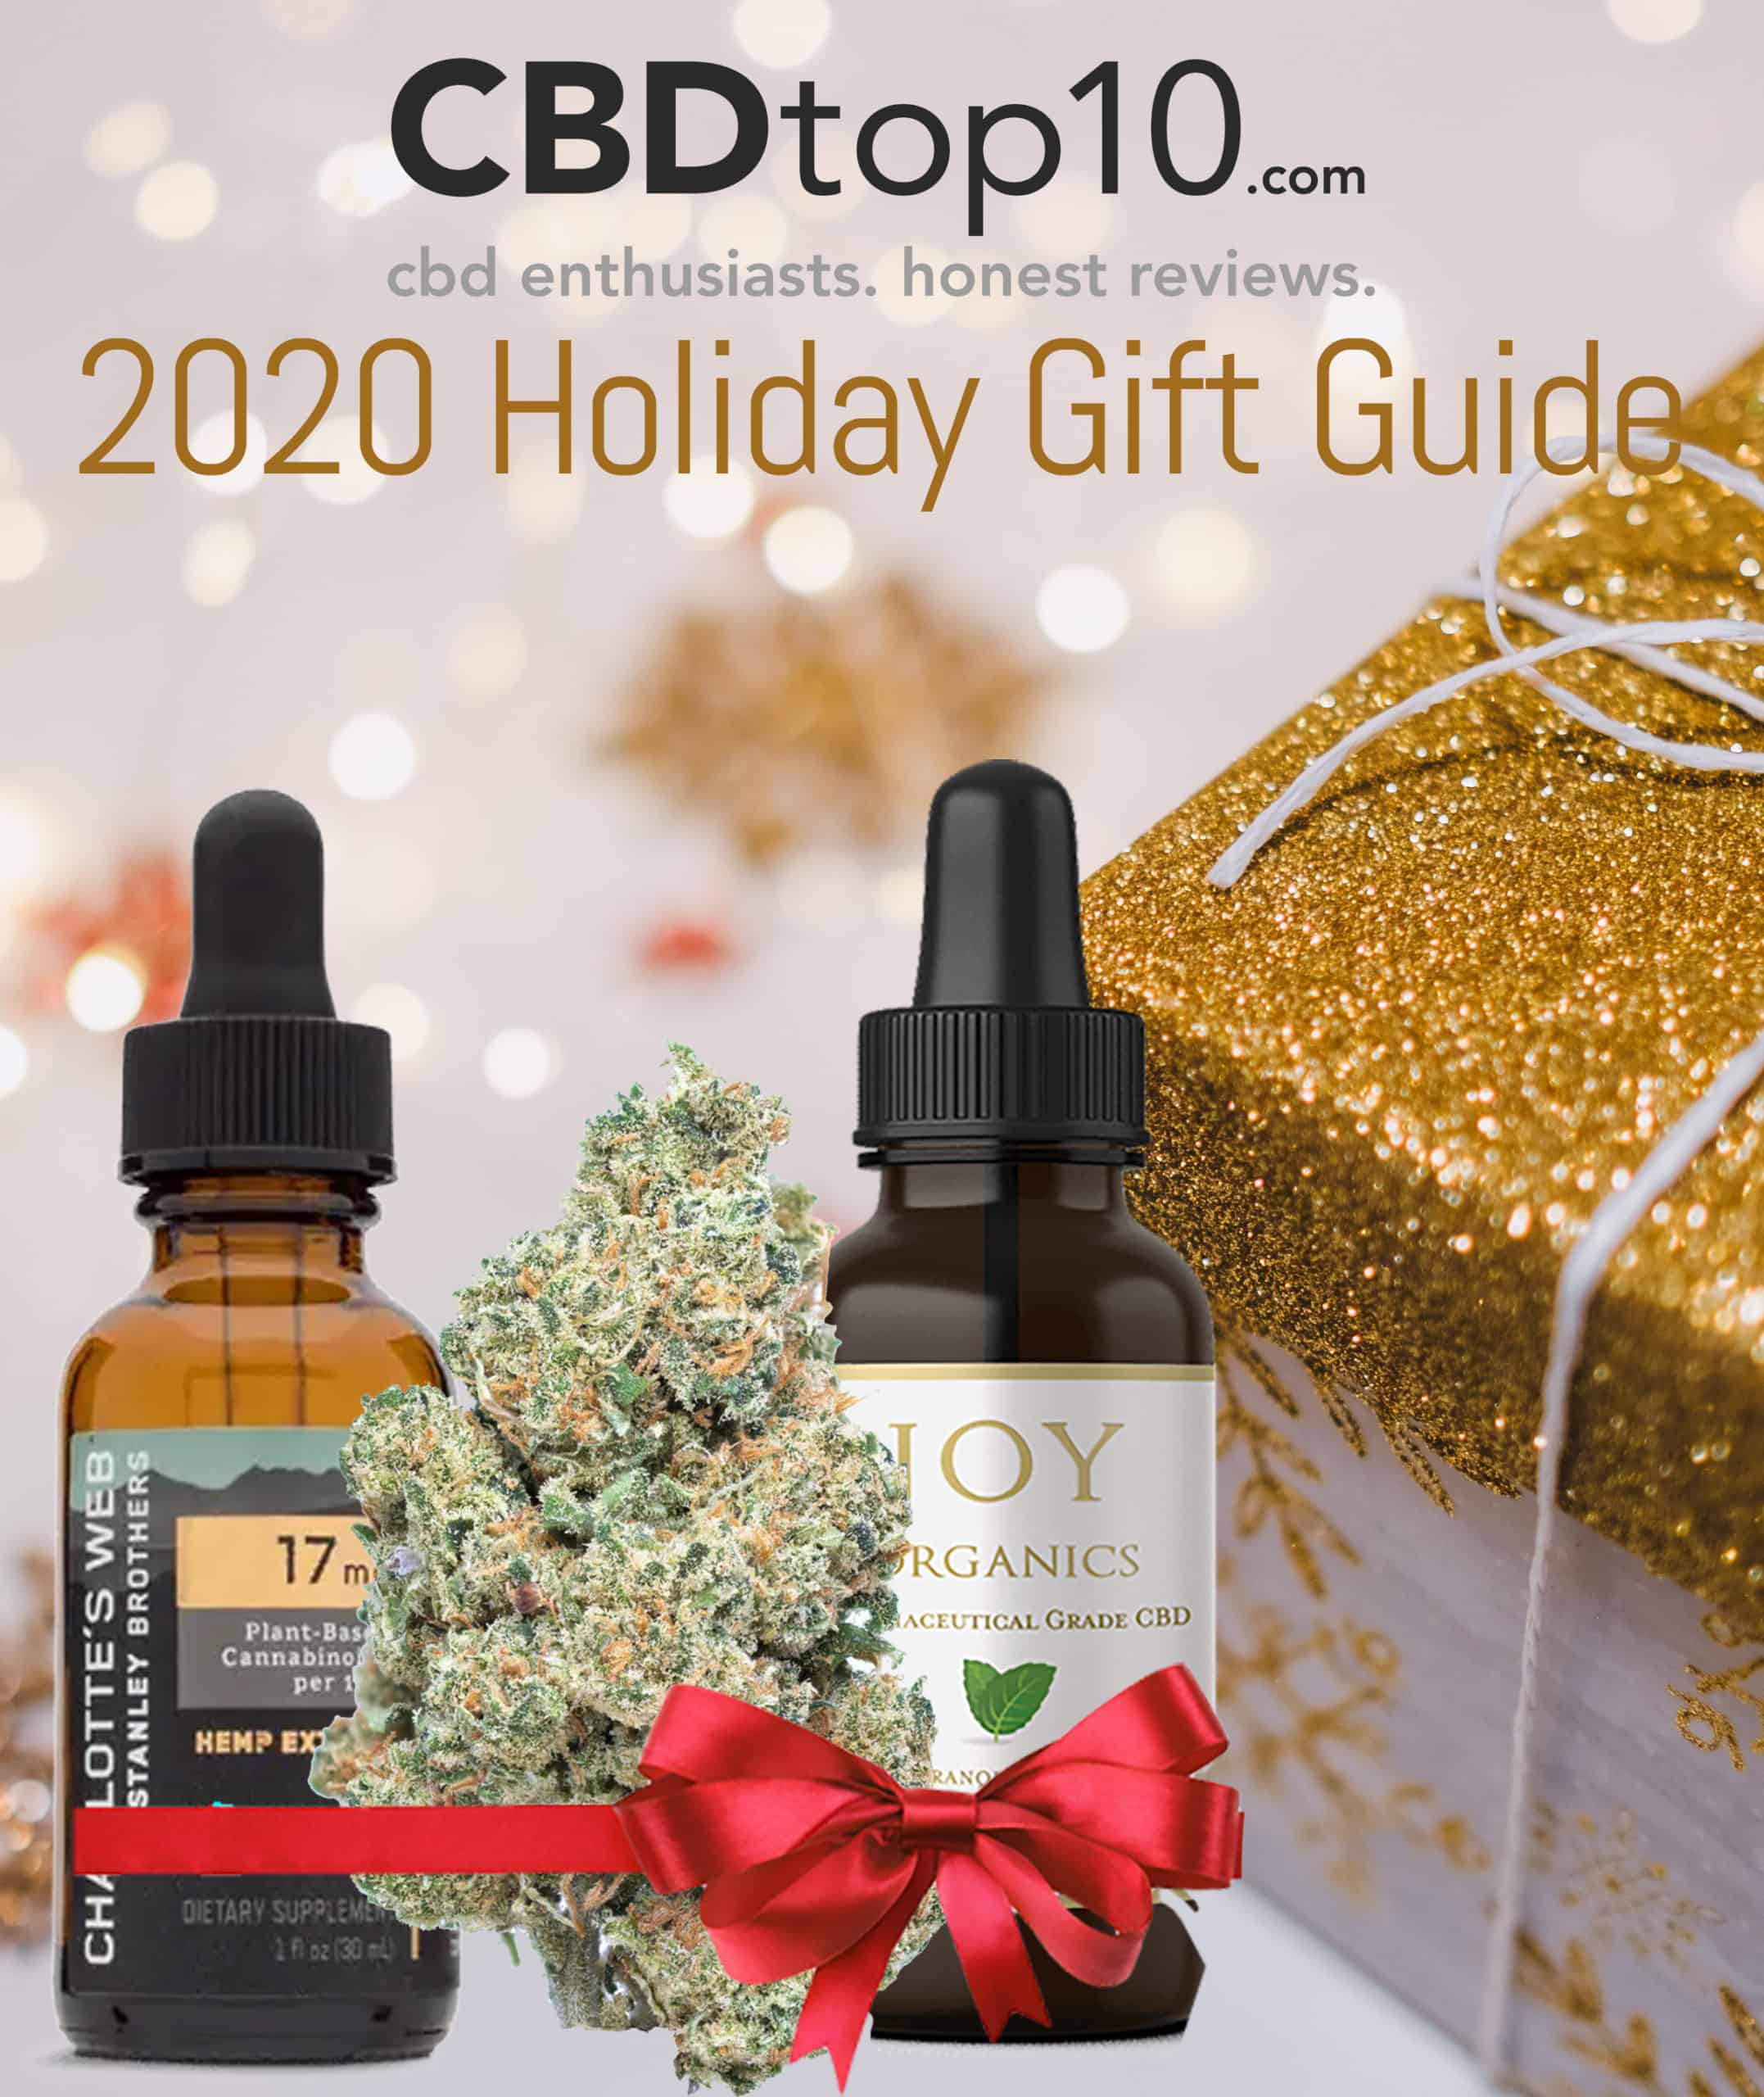 CBDtop10 2020 Holiday Gift Guide